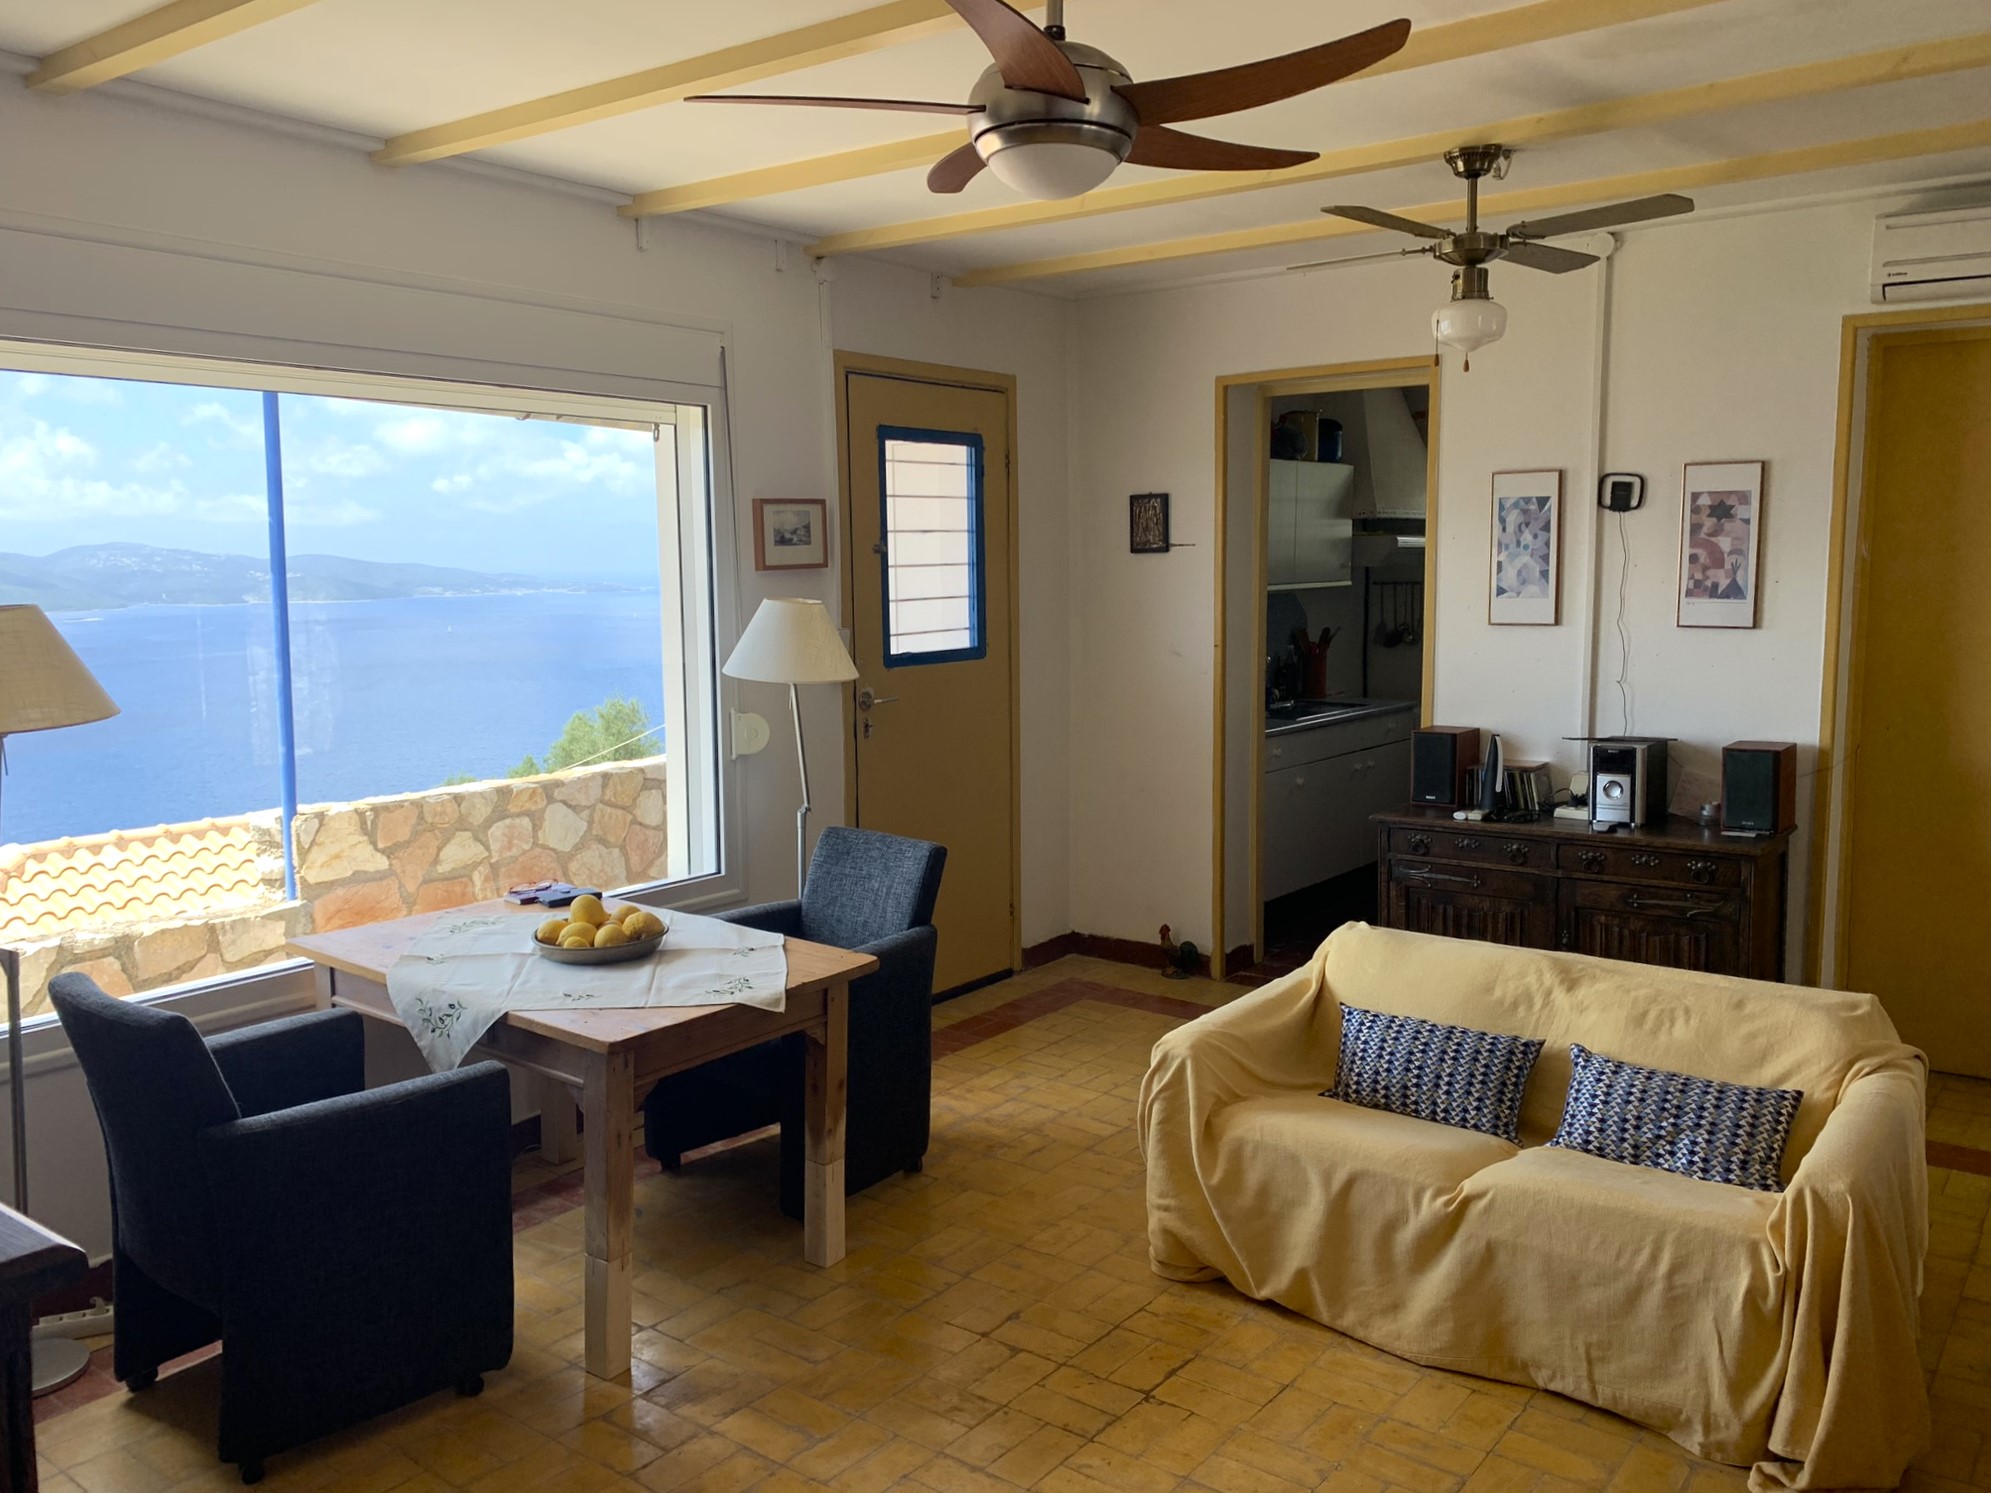 Living room of house for sale on Ithaca Greece, Lefki